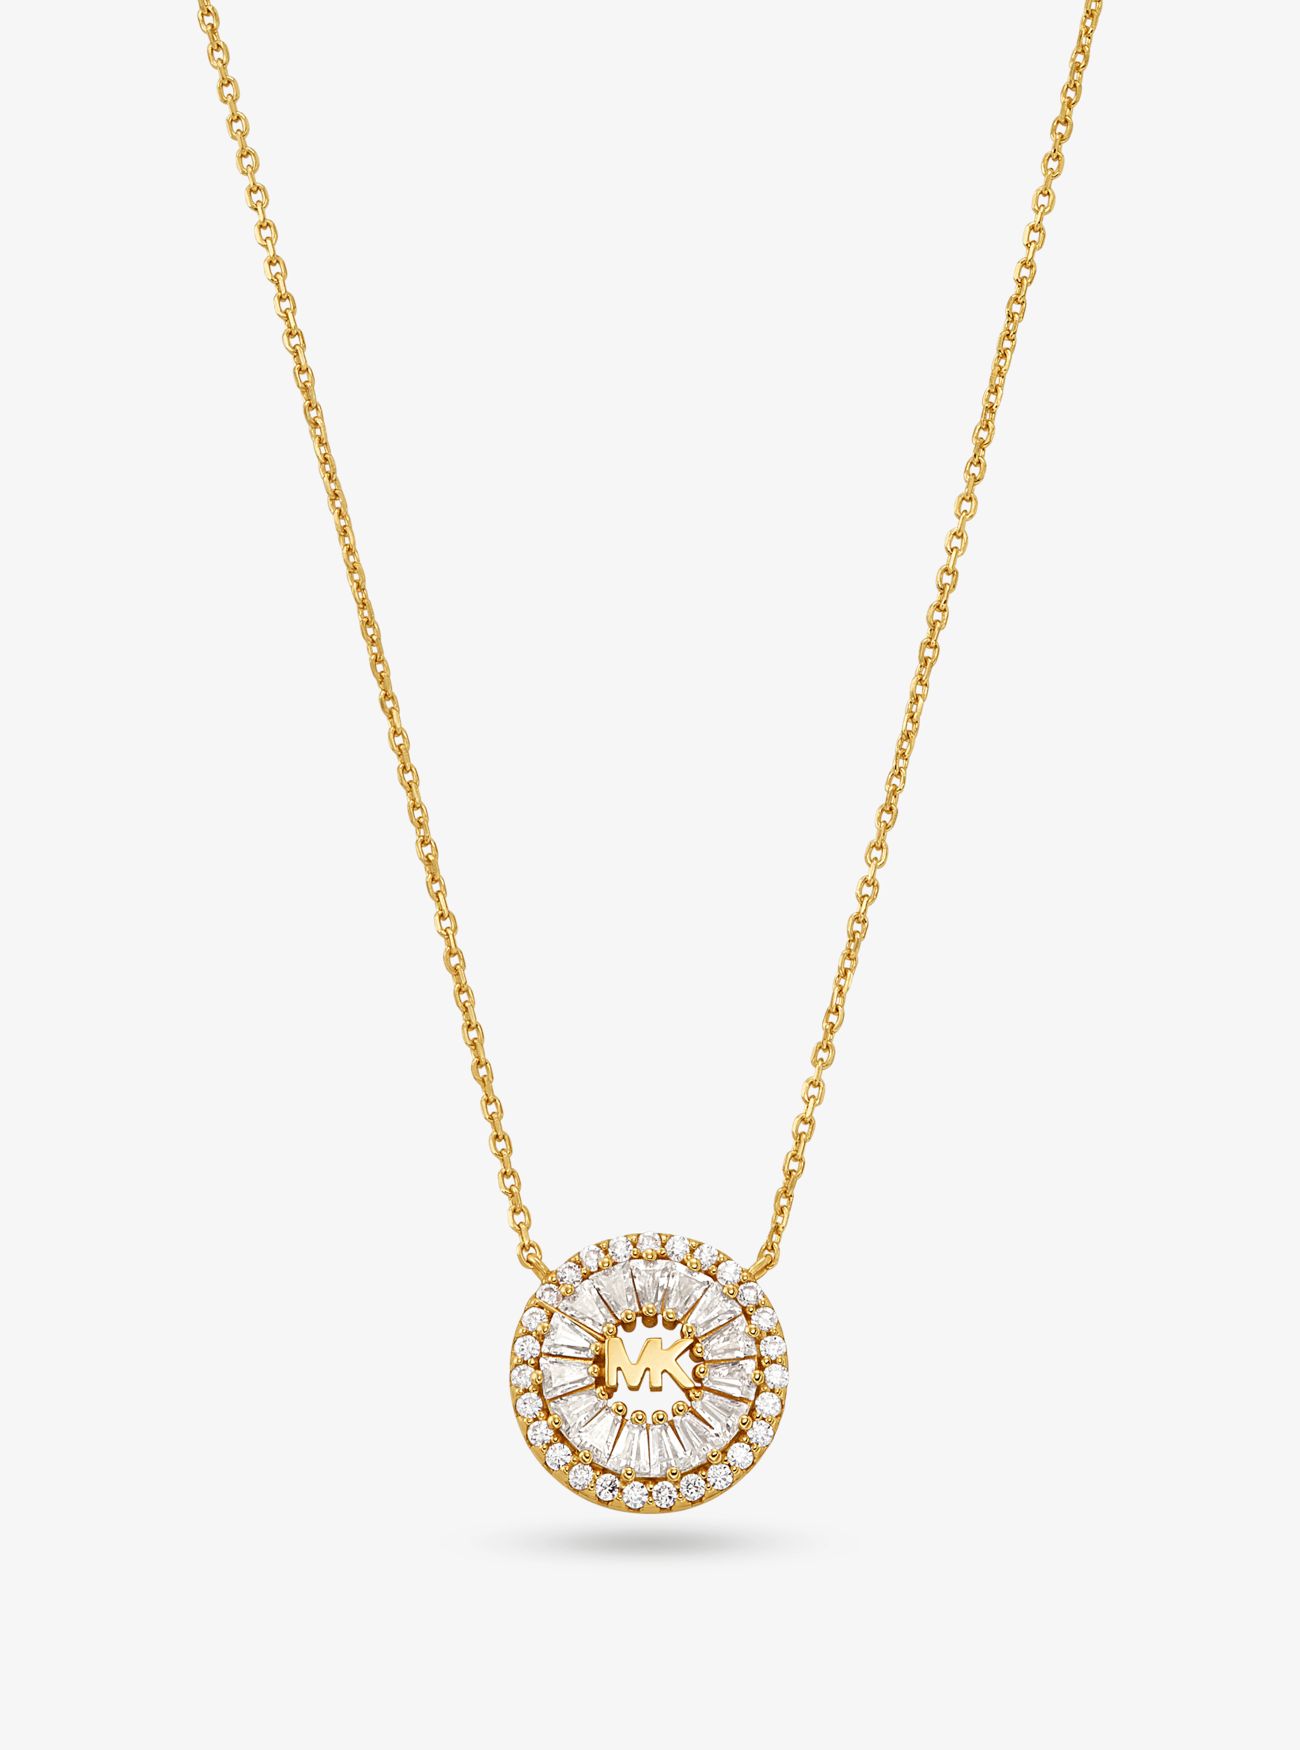 MK Precious Metal-Plated Sterling Silver PavÃ© Halo Necklace - Gold - Michael Kors